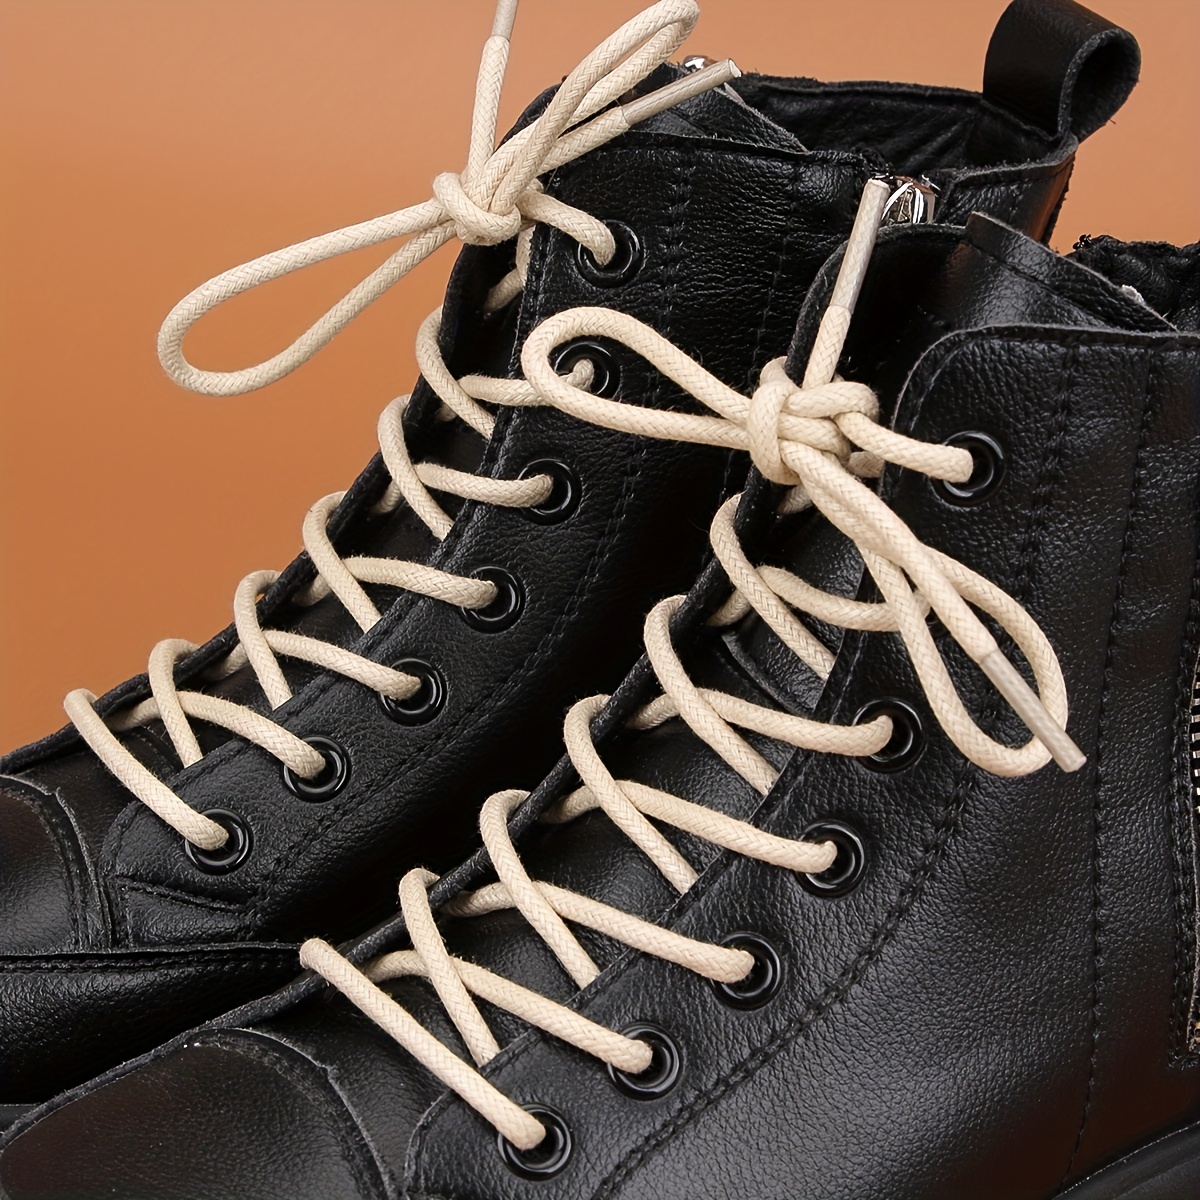 Shop All Leather Laces at Shoelaces Express